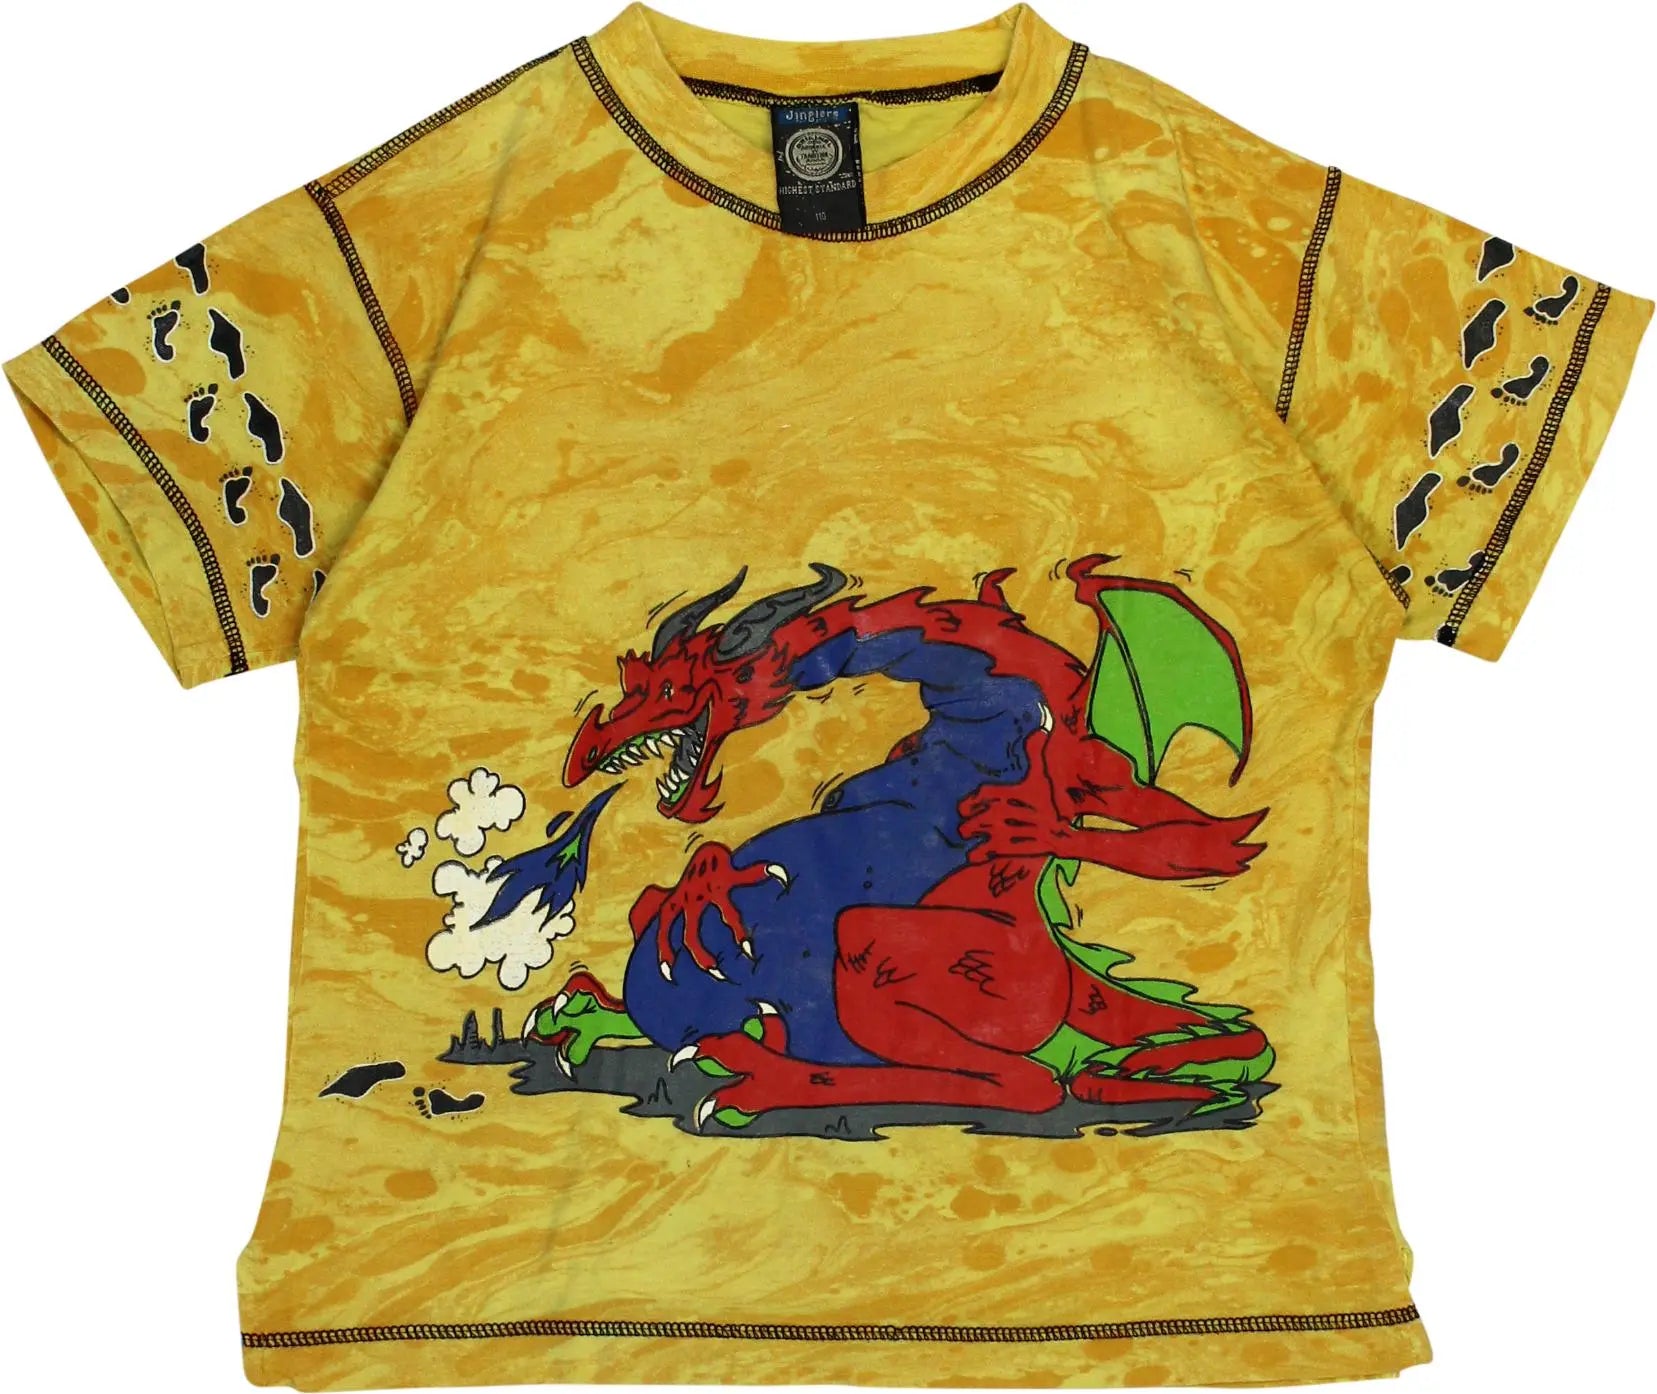 Jinglers - T-shirt with Dragon- ThriftTale.com - Vintage and second handclothing